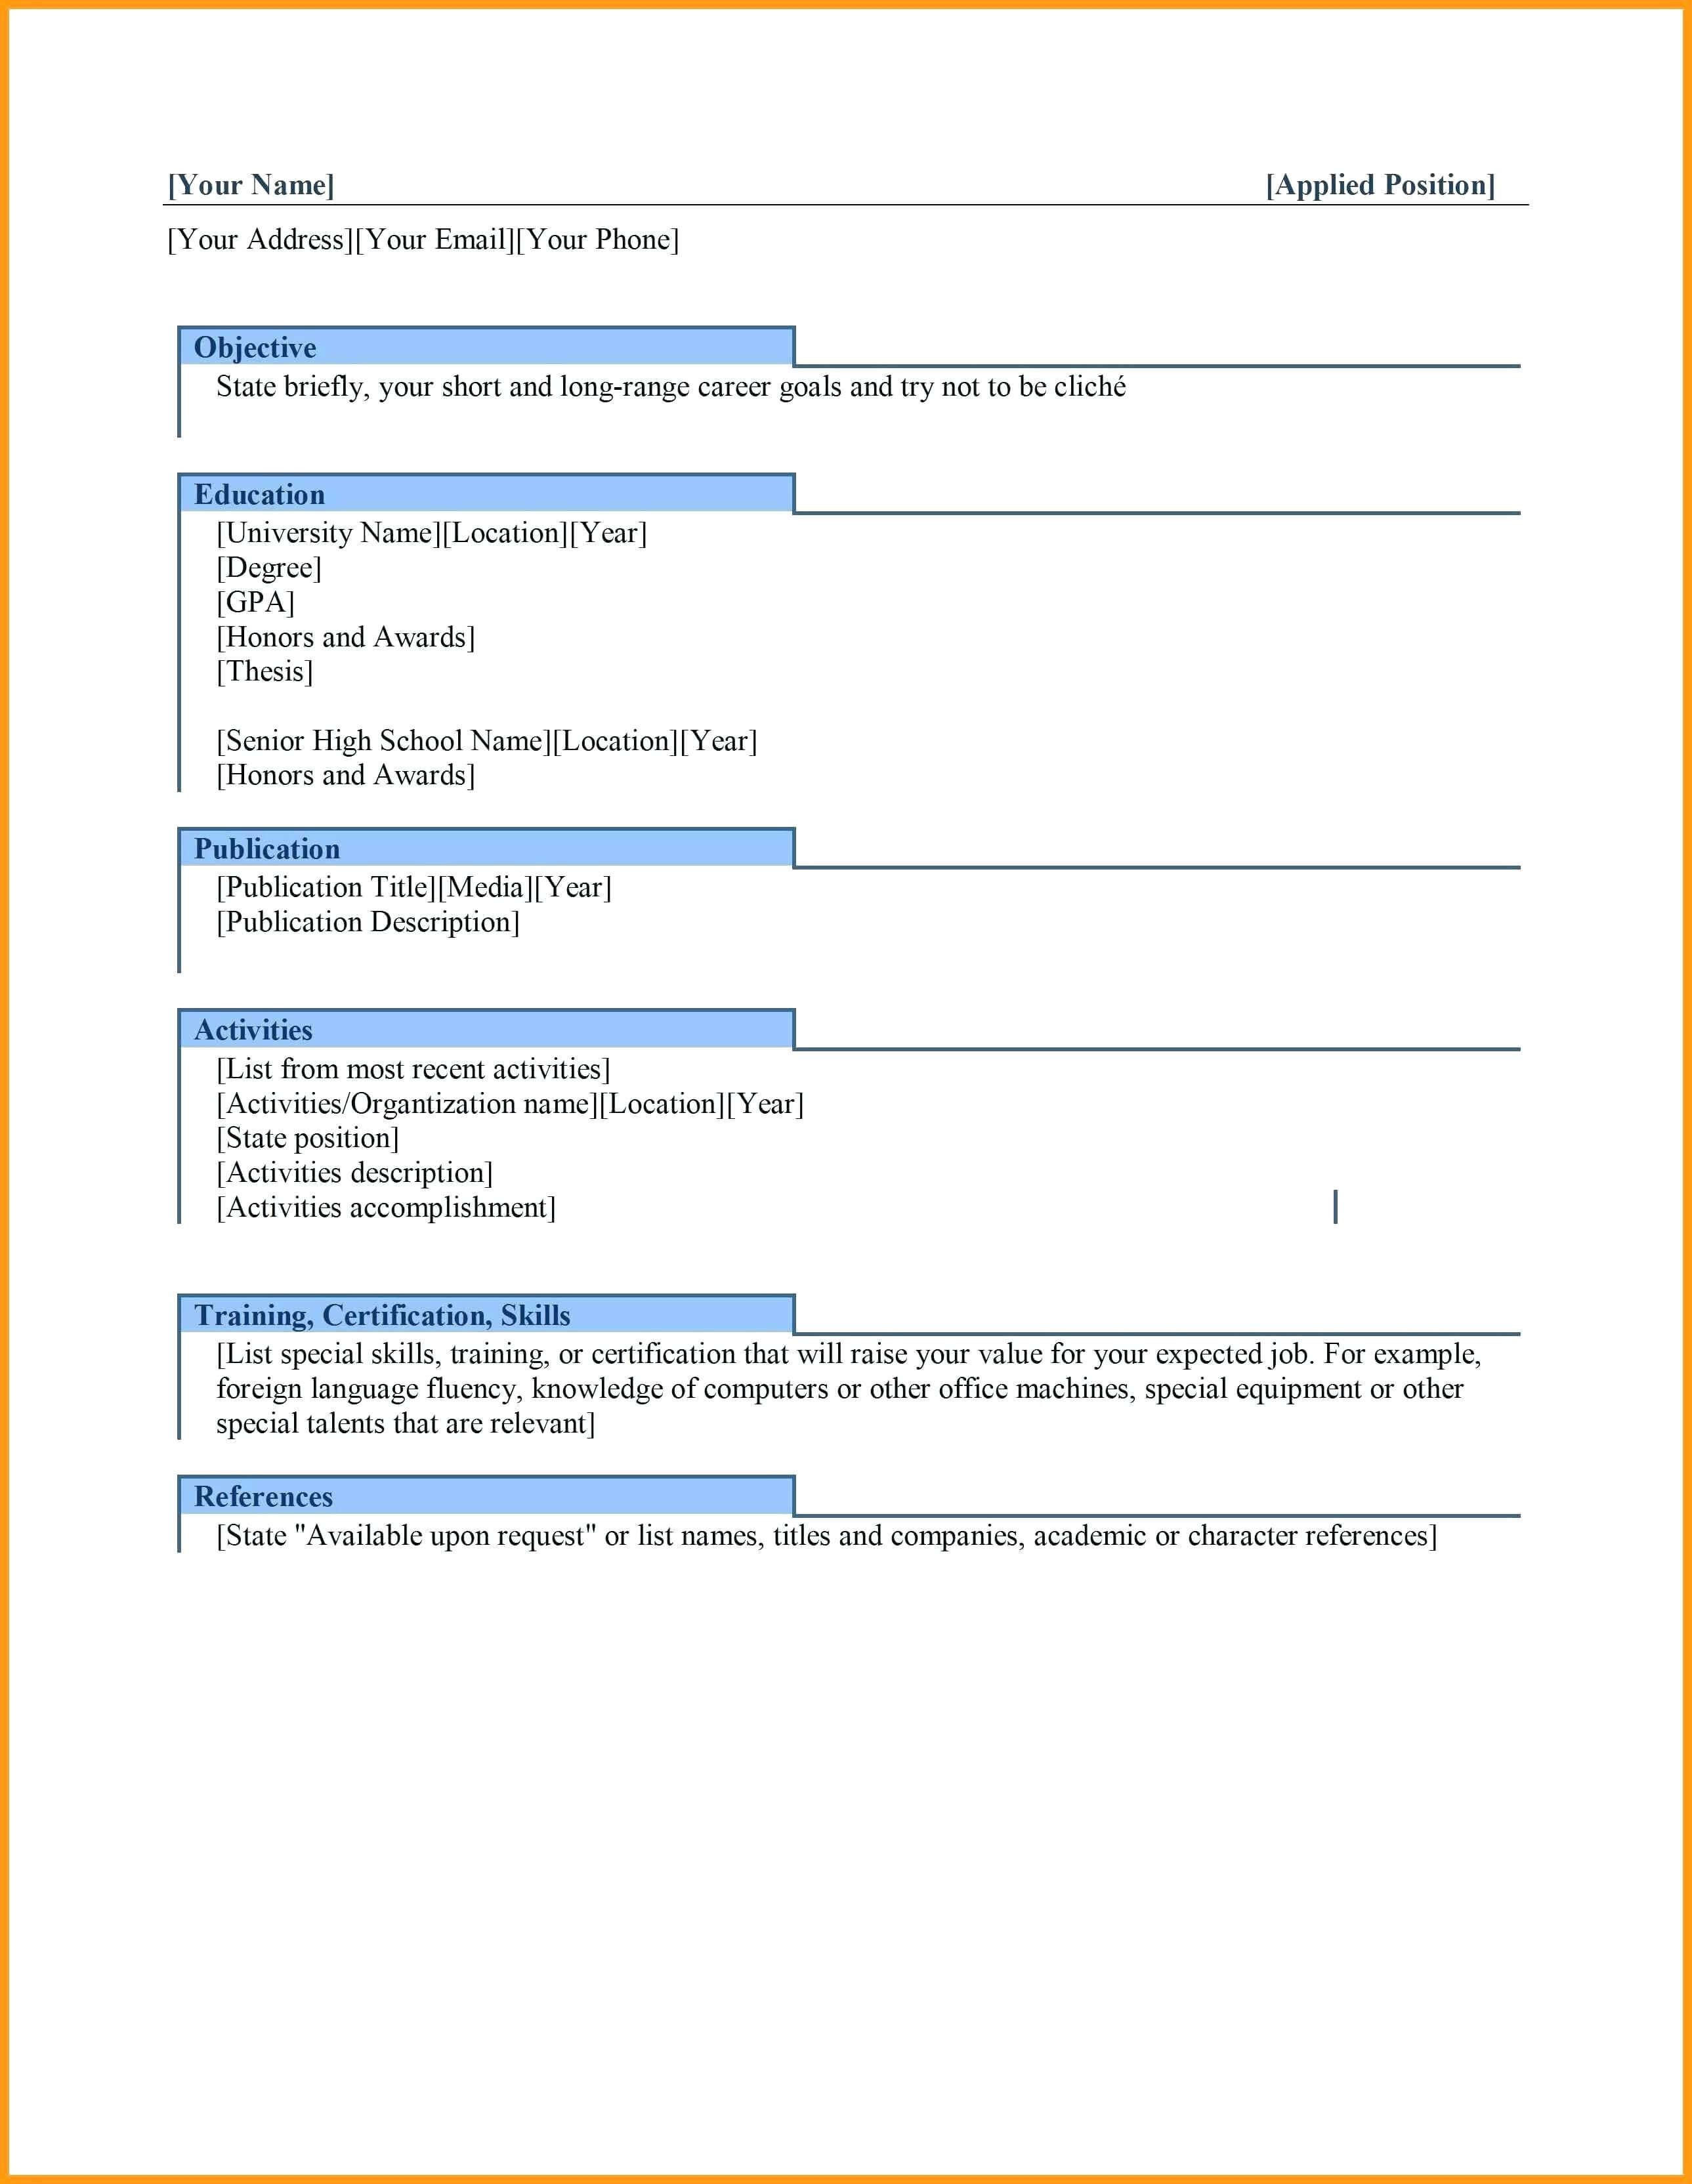 Memo Template Word 2010 – Wepage.co For Memo Template Word 2010